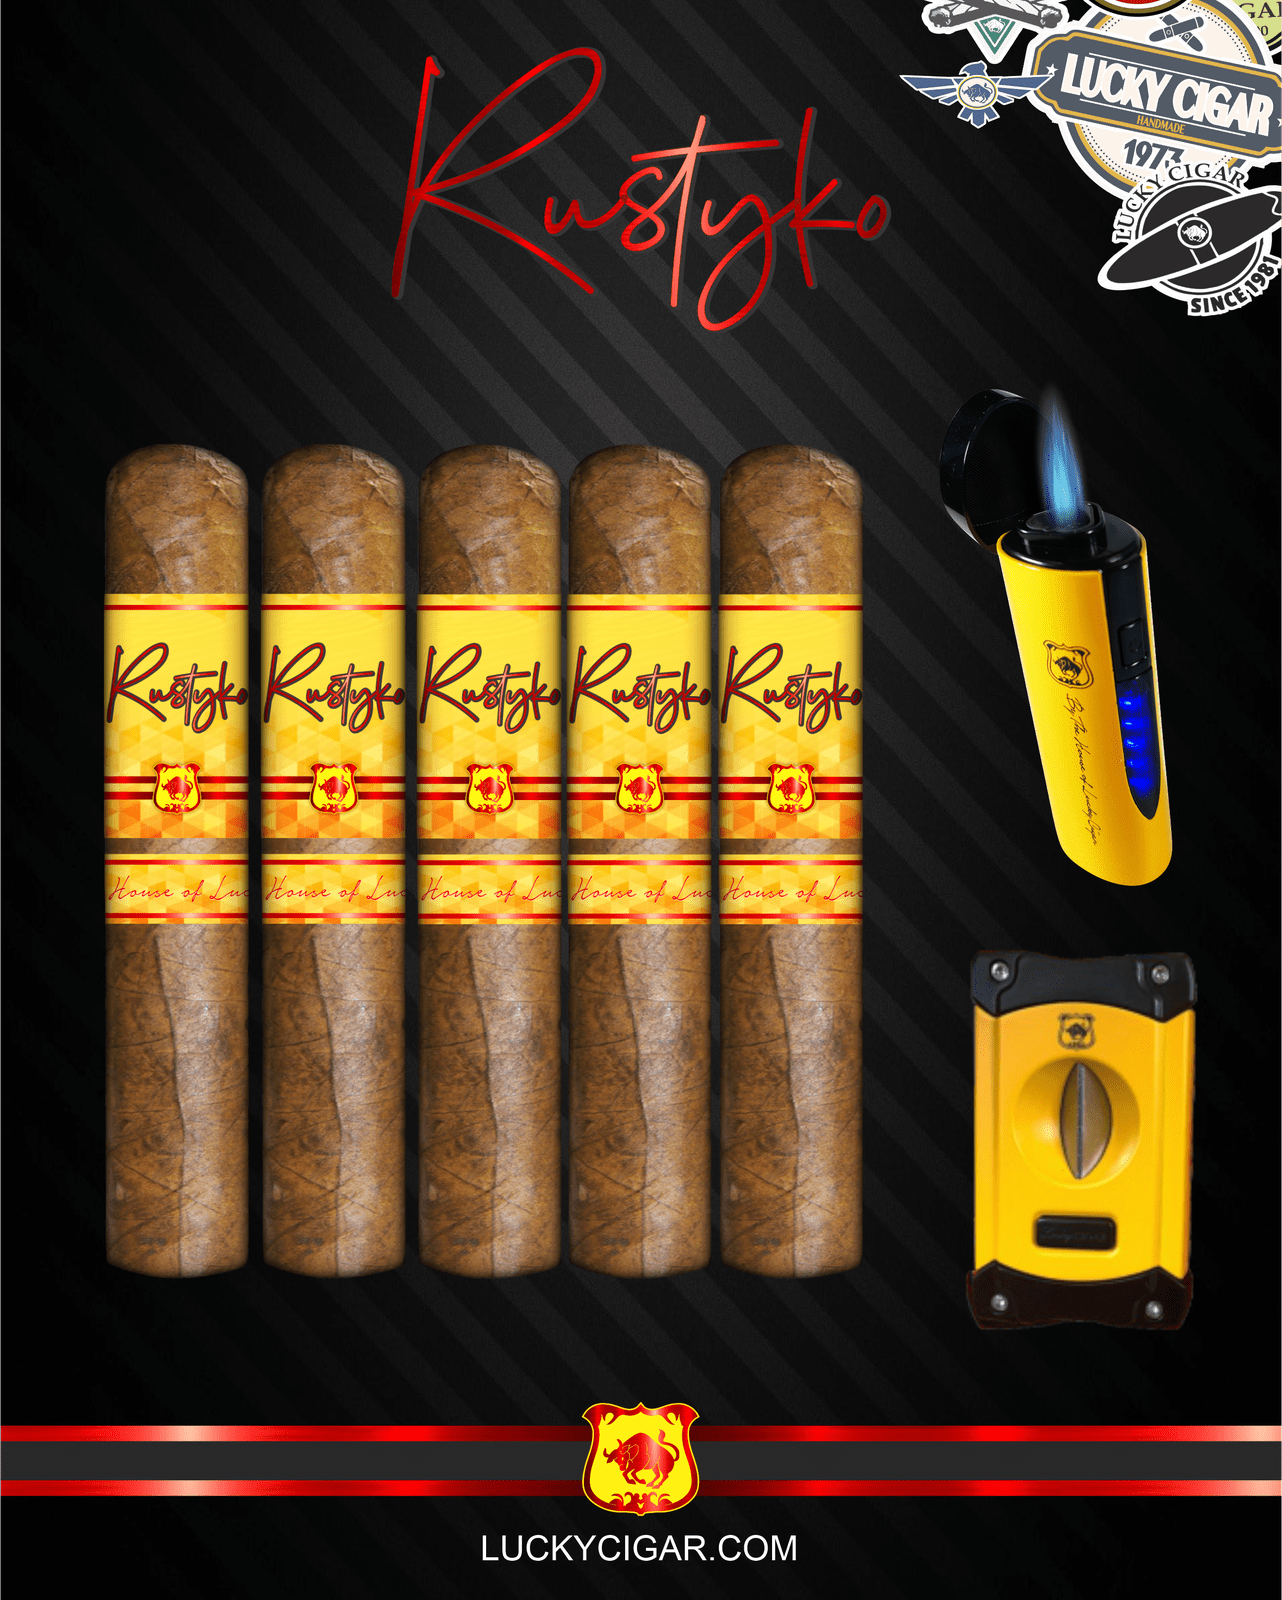 Infused Cigars: Rustyko Robusto 5x54 Cigars - Set of 5 with Yellow Torch, Cutter